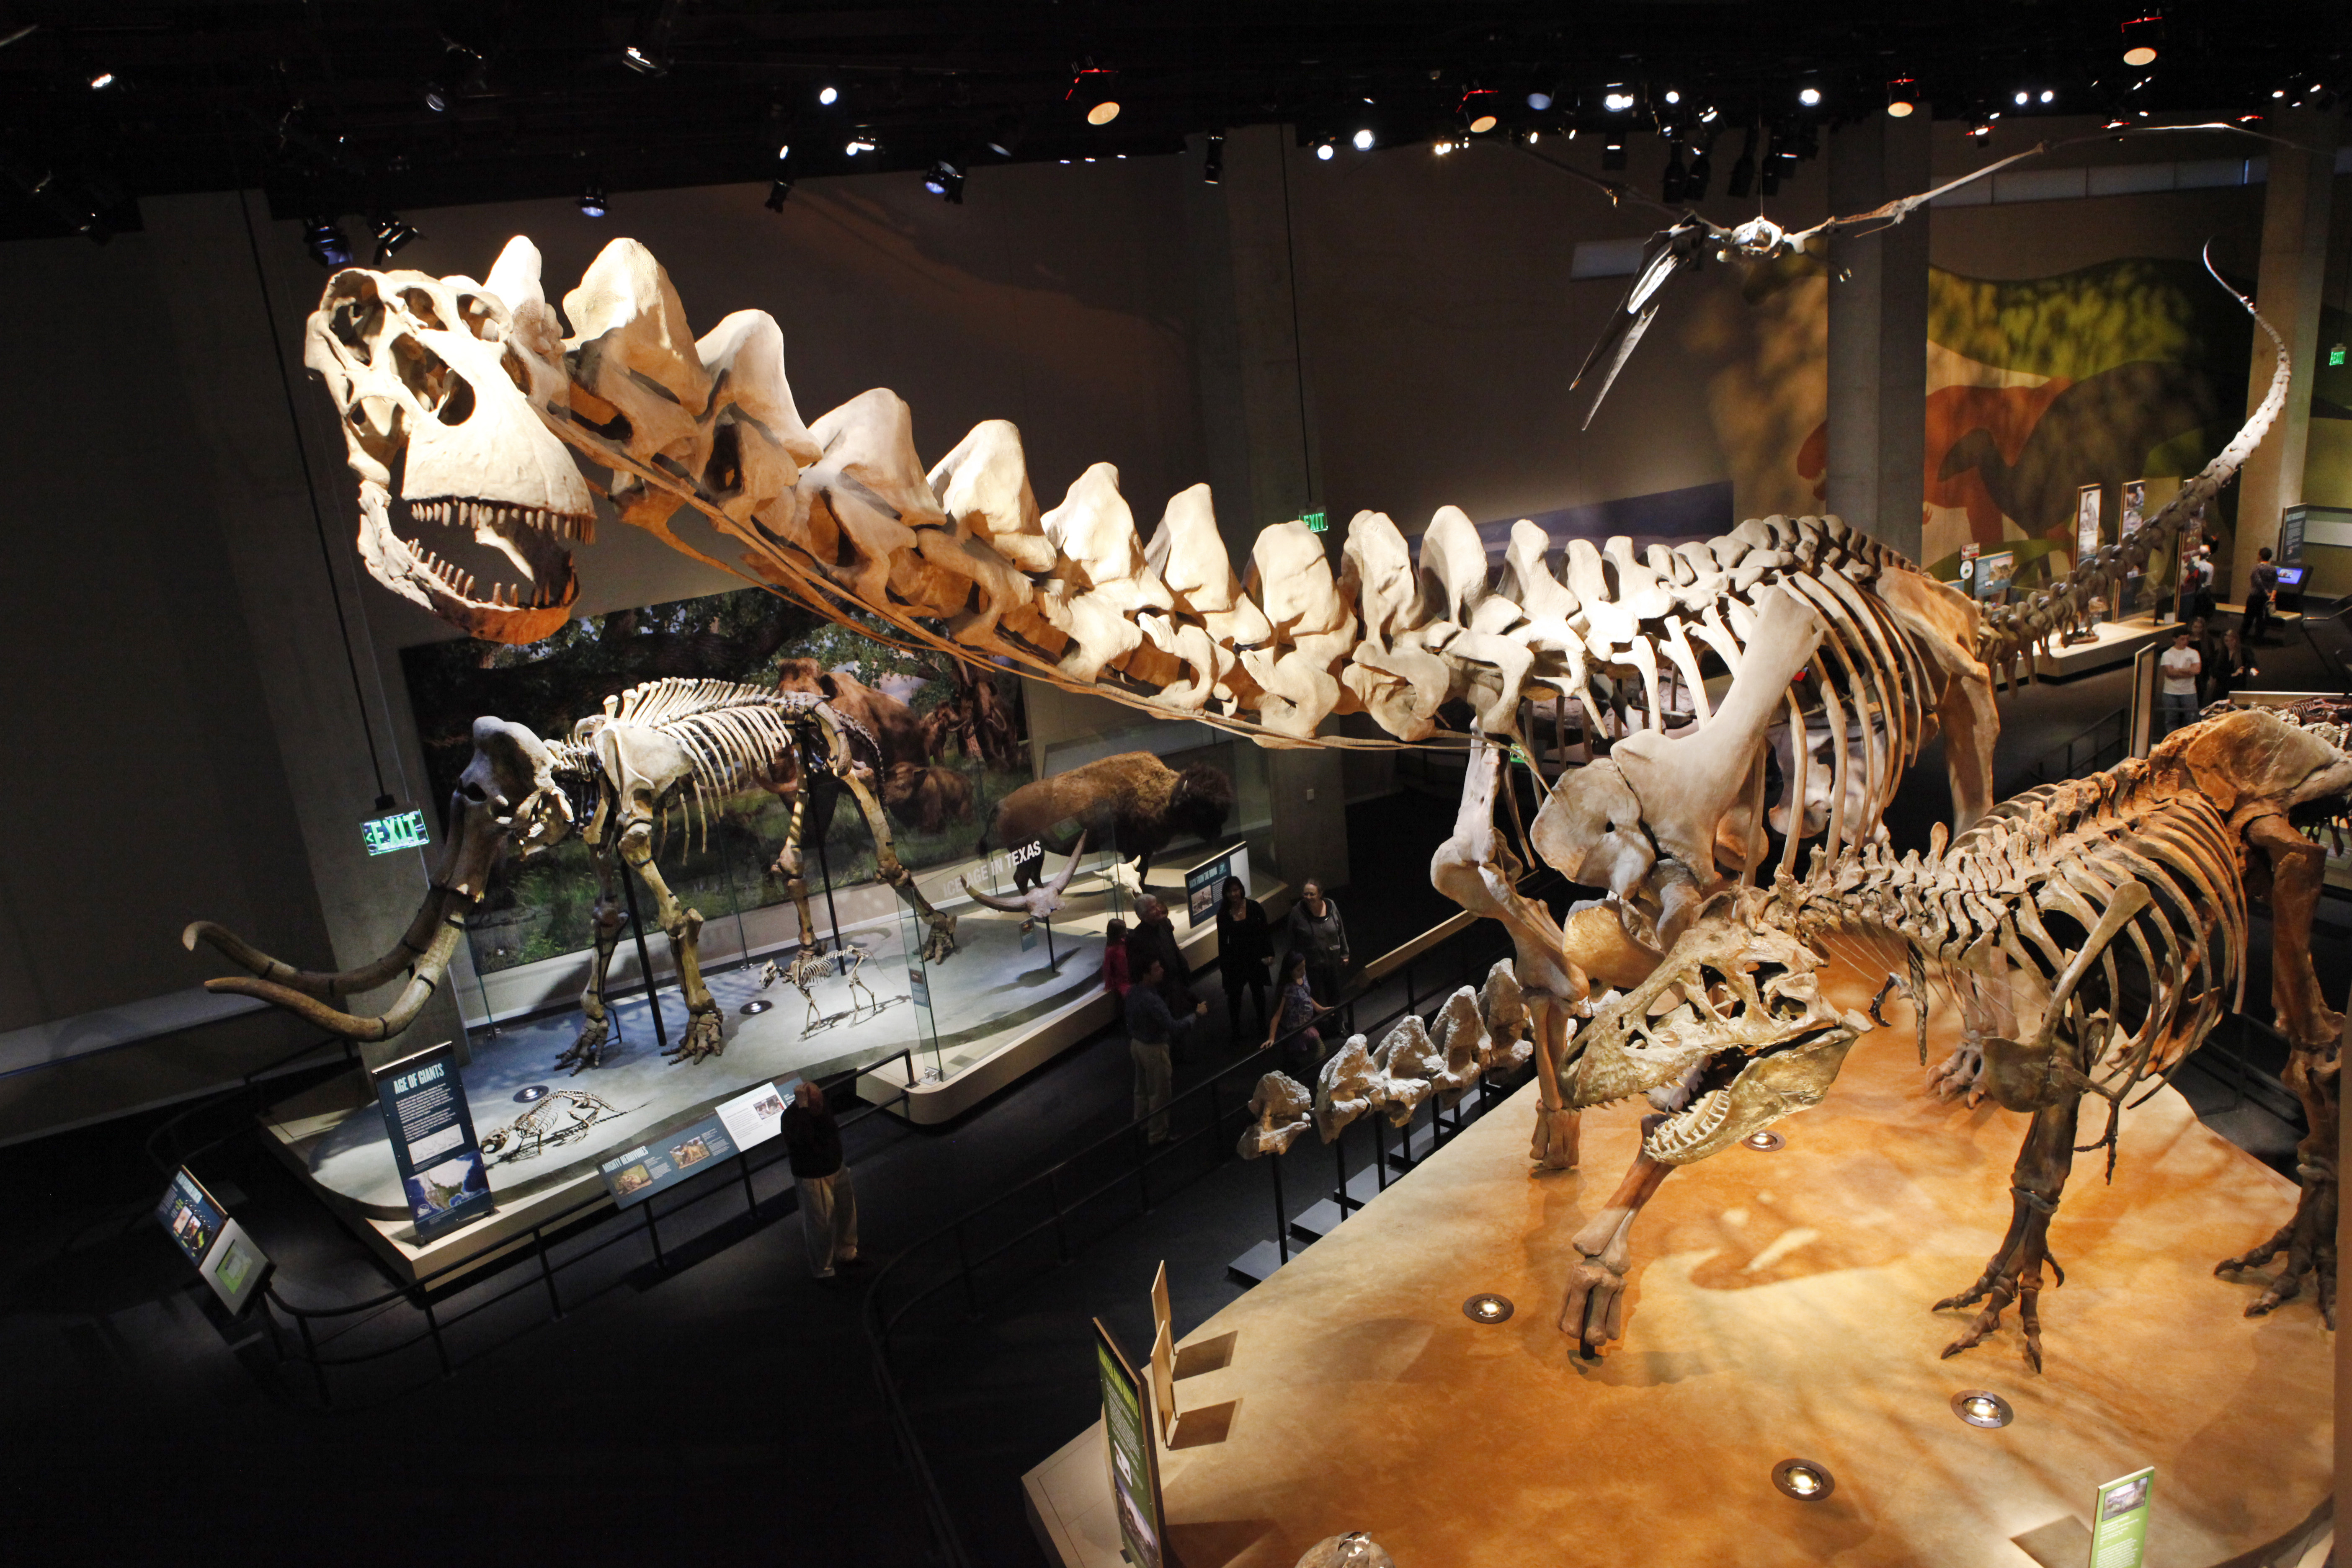 The Alamosaurus skeleton towers over other fossils in the Perot Museum of Nature and Science.